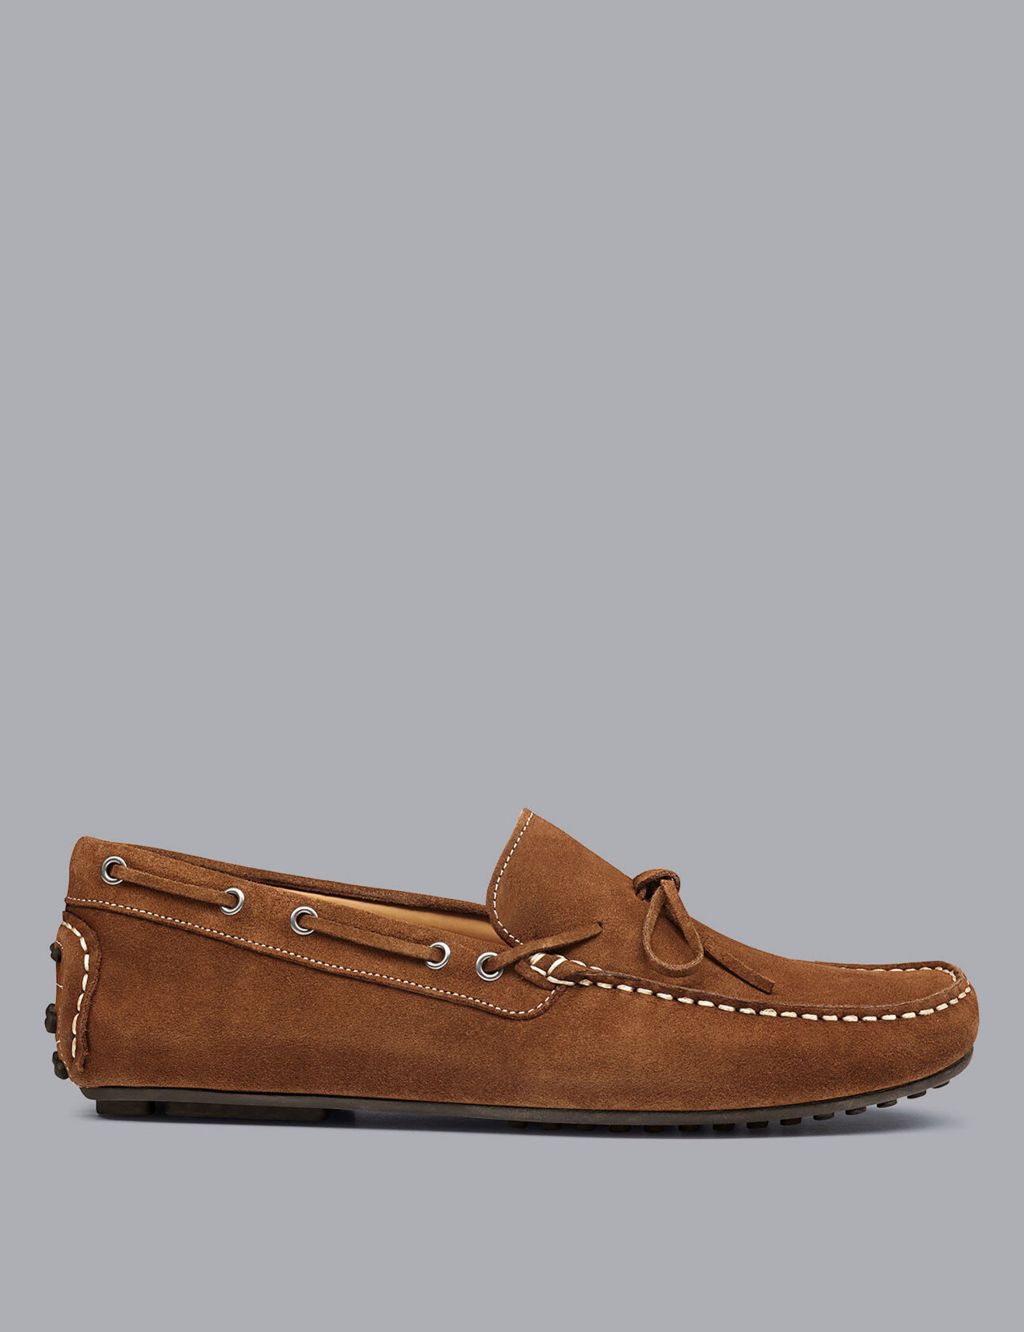 Suede Slip On Driving Loafers image 1